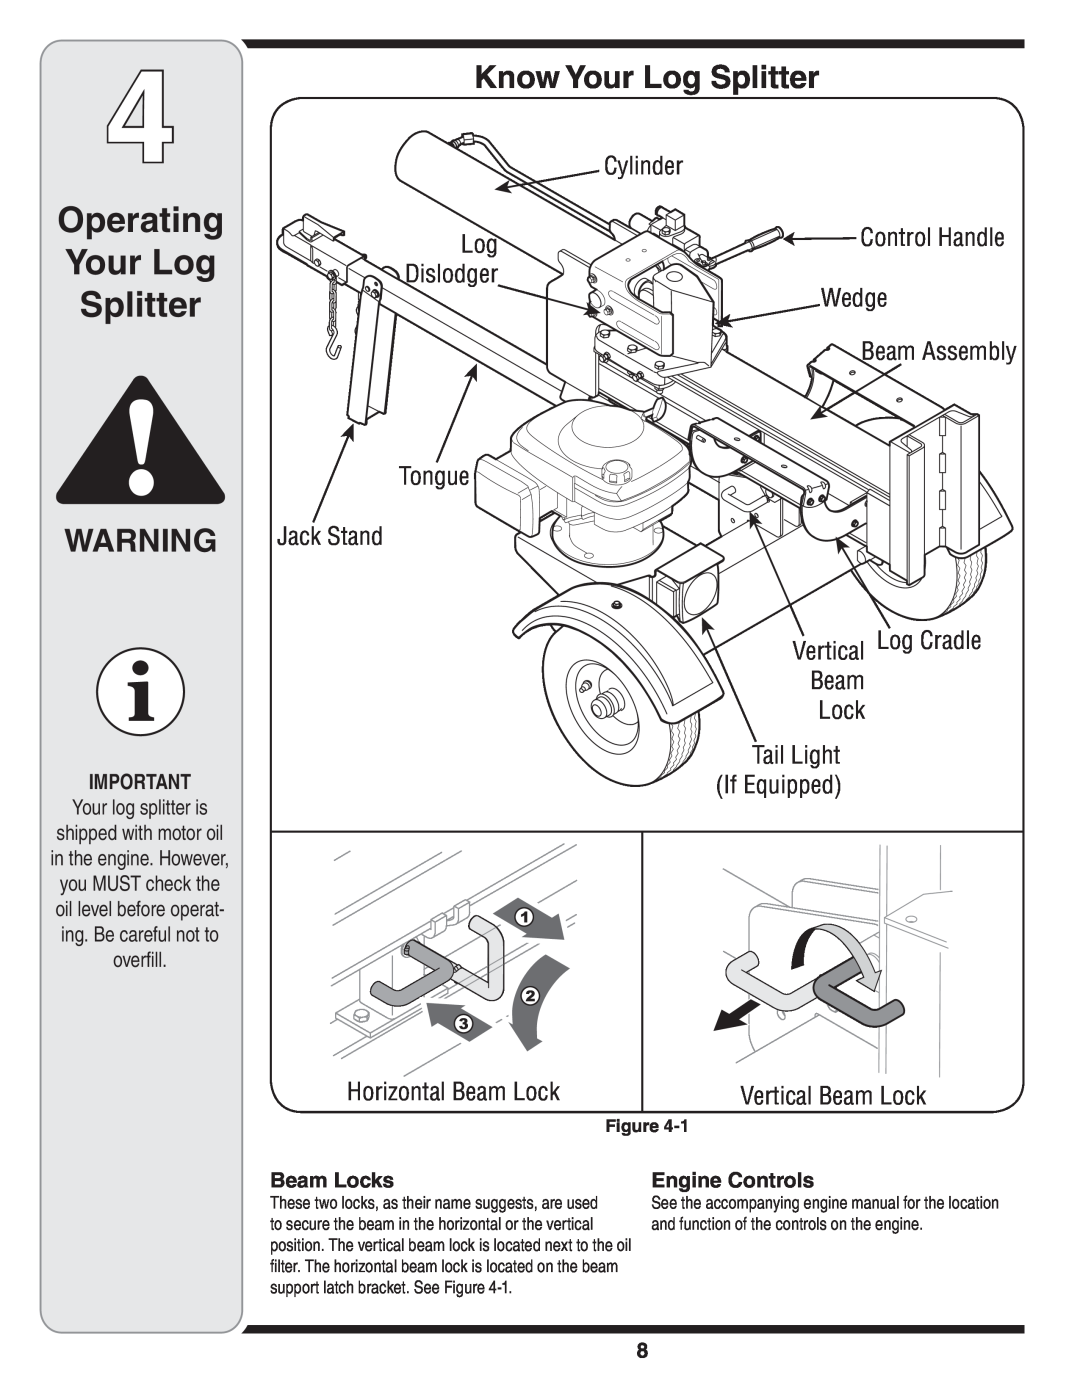 Troy-Bilt 570 Operating Your Log Splitter, Know Your Log Splitter, Your log splitter is, Cylinder, Wedge, If Equipped 